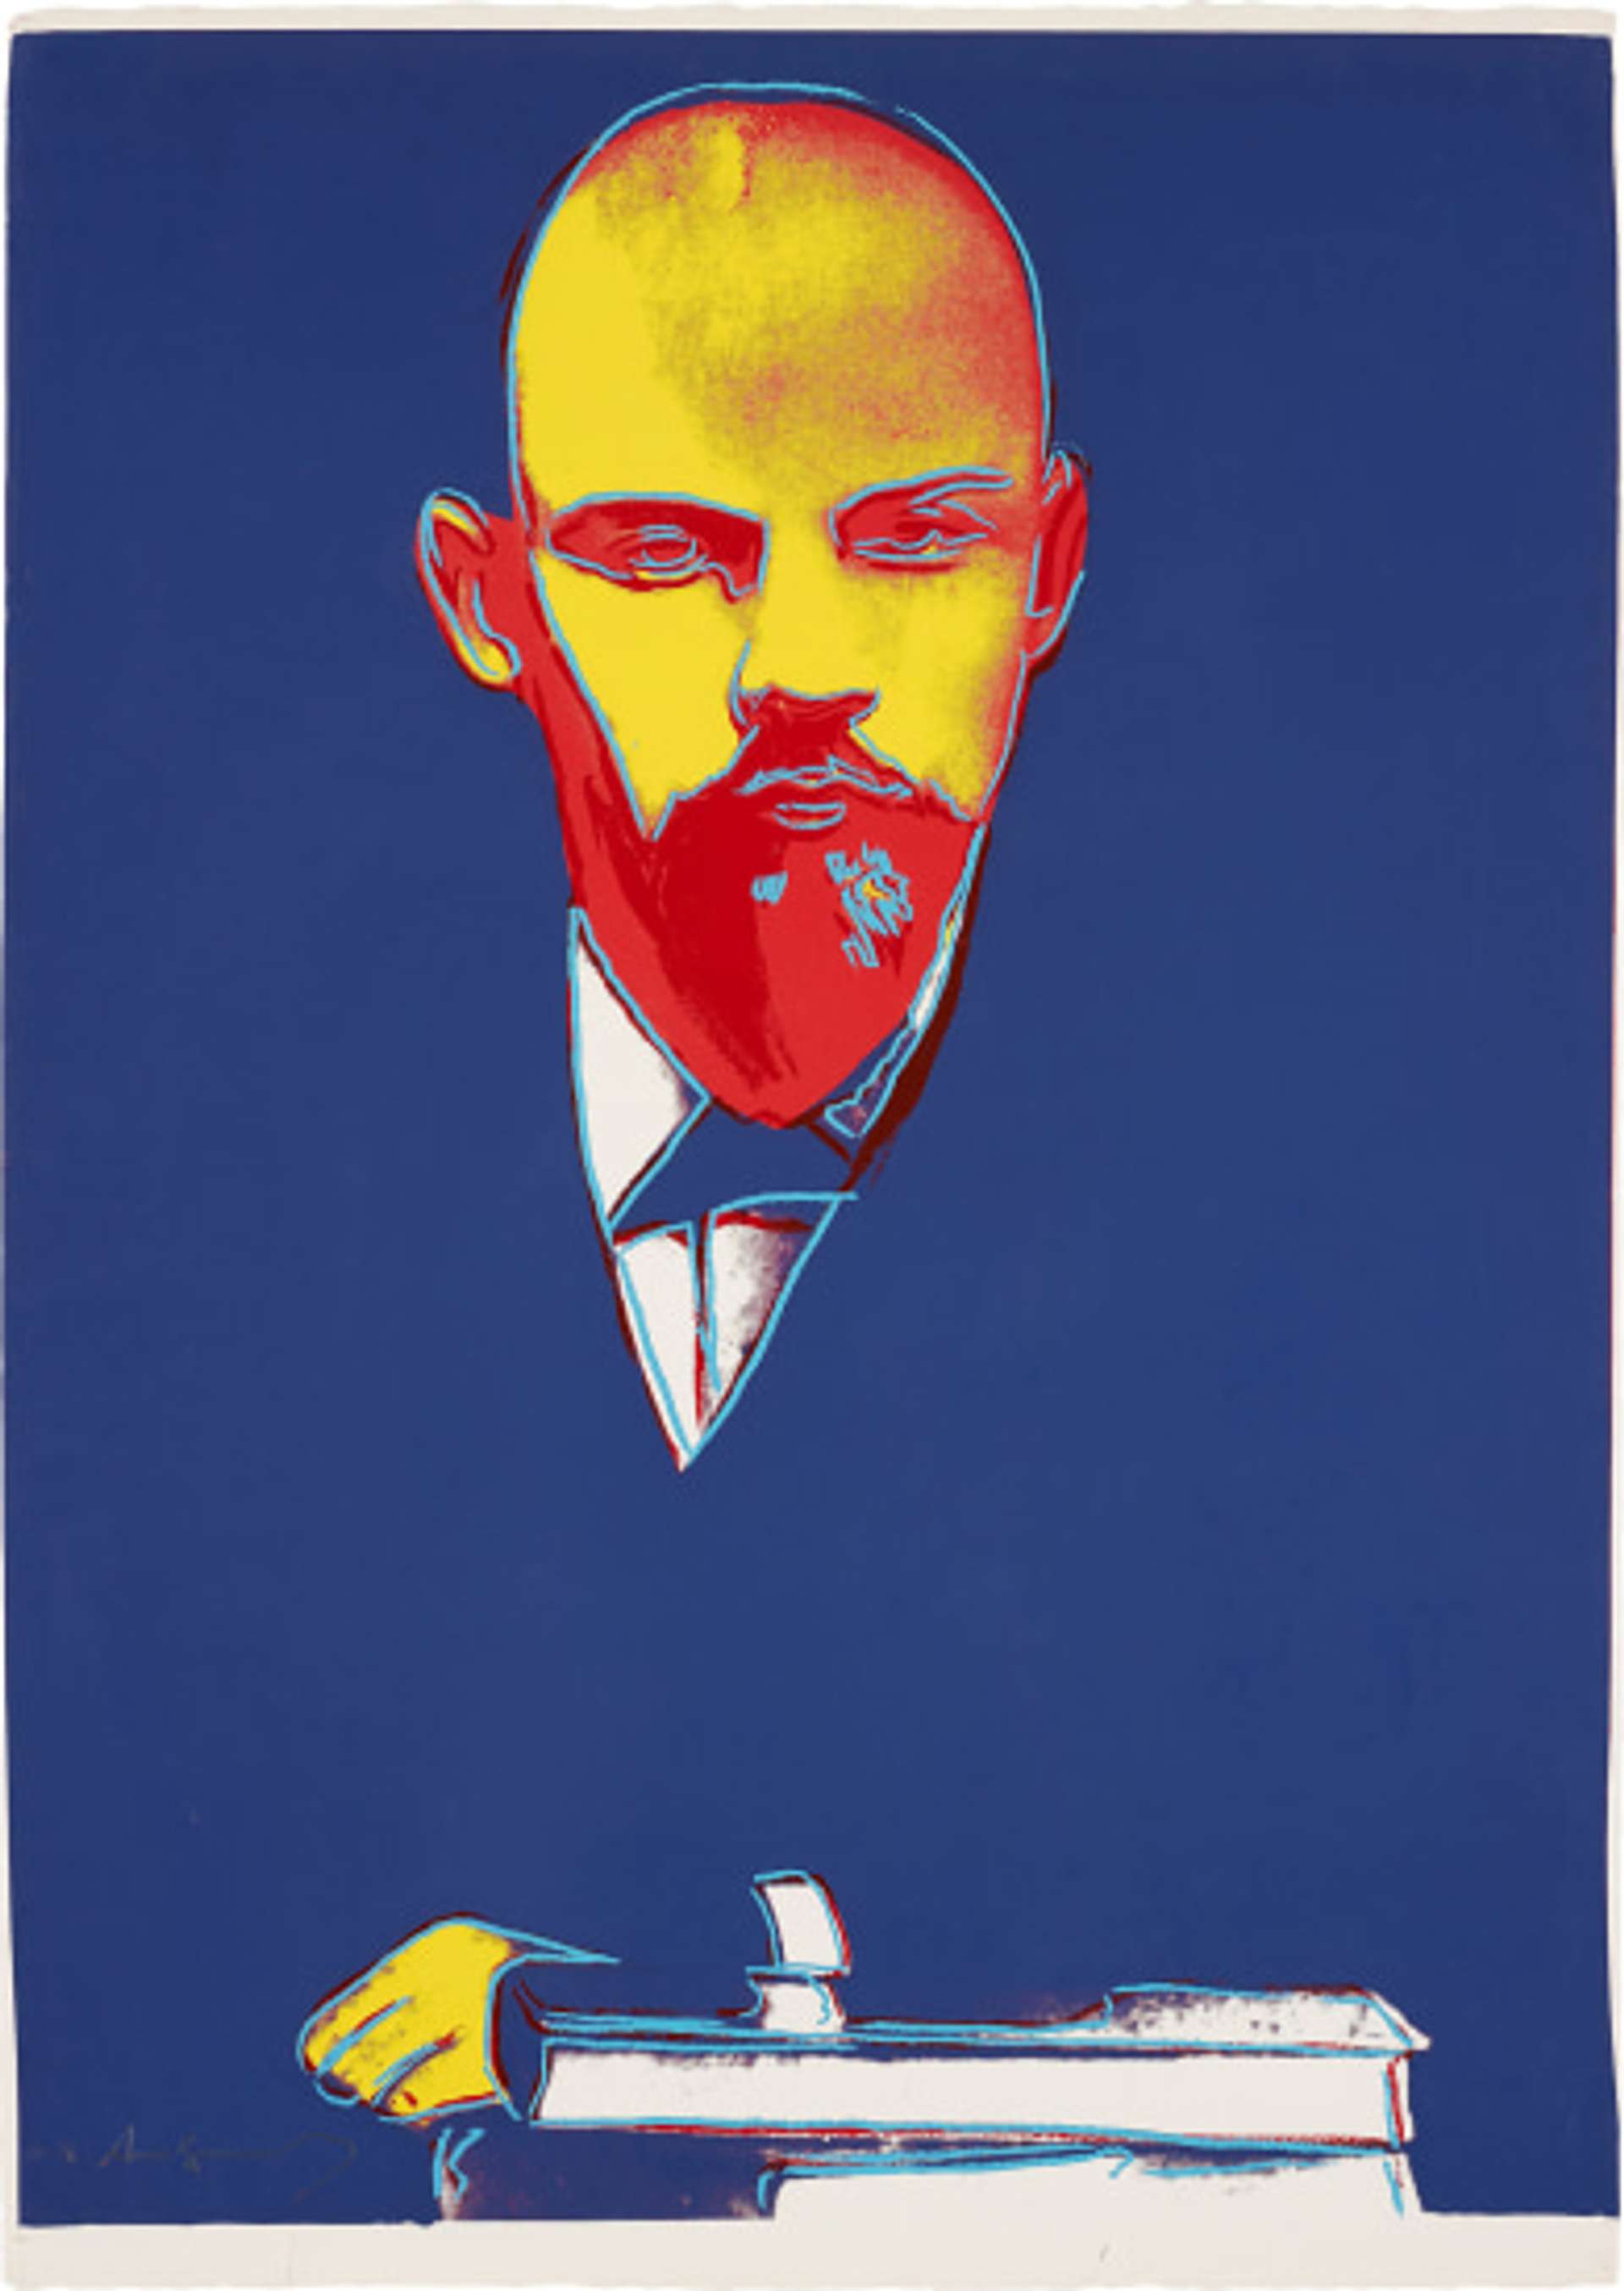 Lenin (TP 35/46) by Andy Warhol